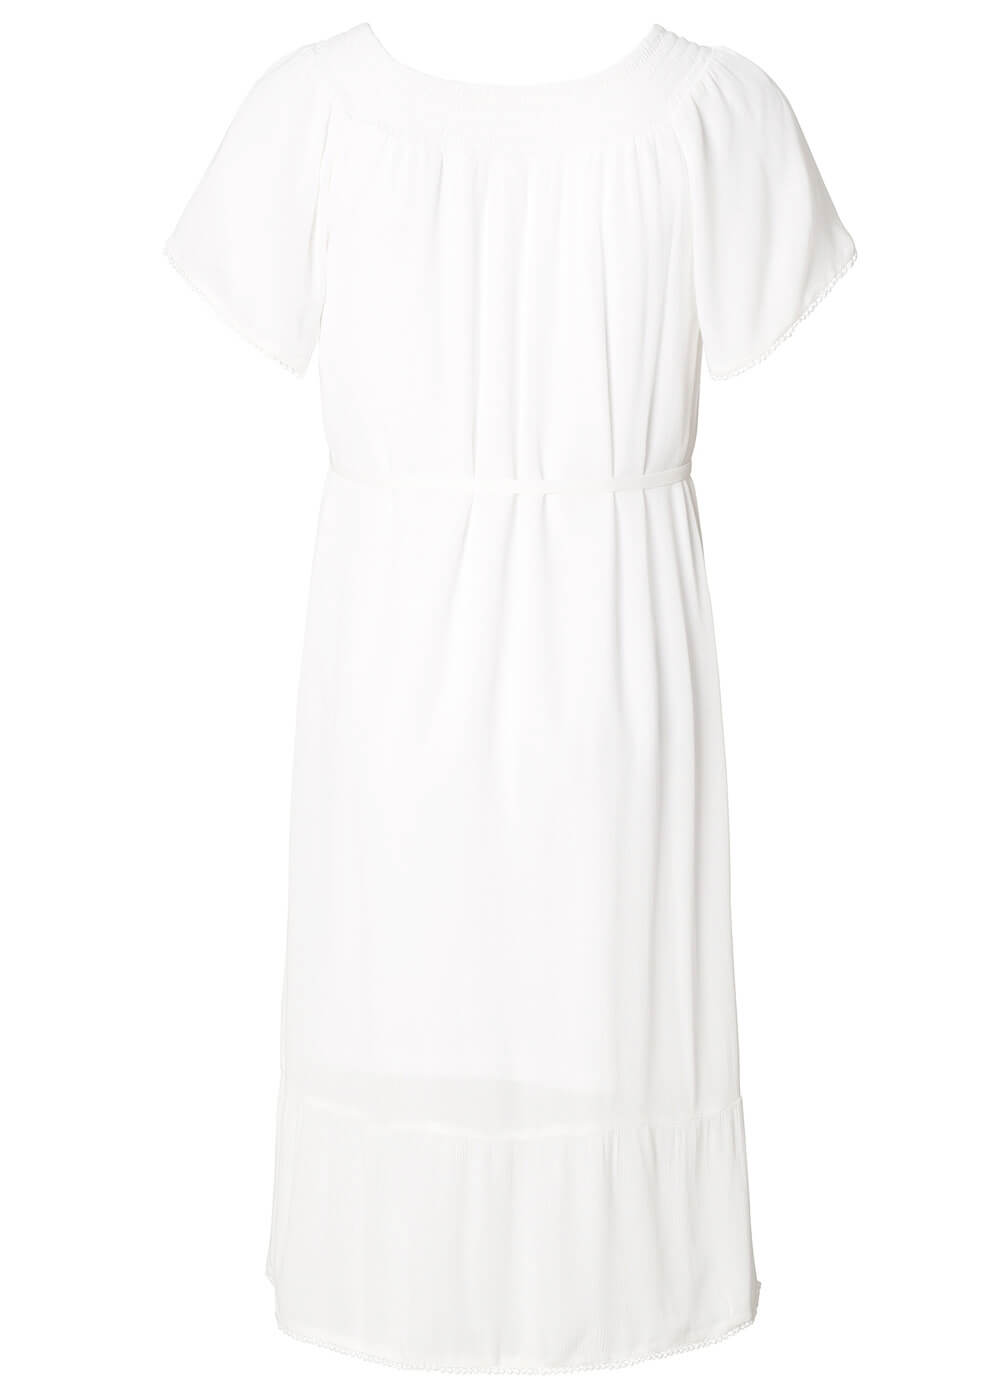 Summer Maternity Boho Dress in White by Esprit